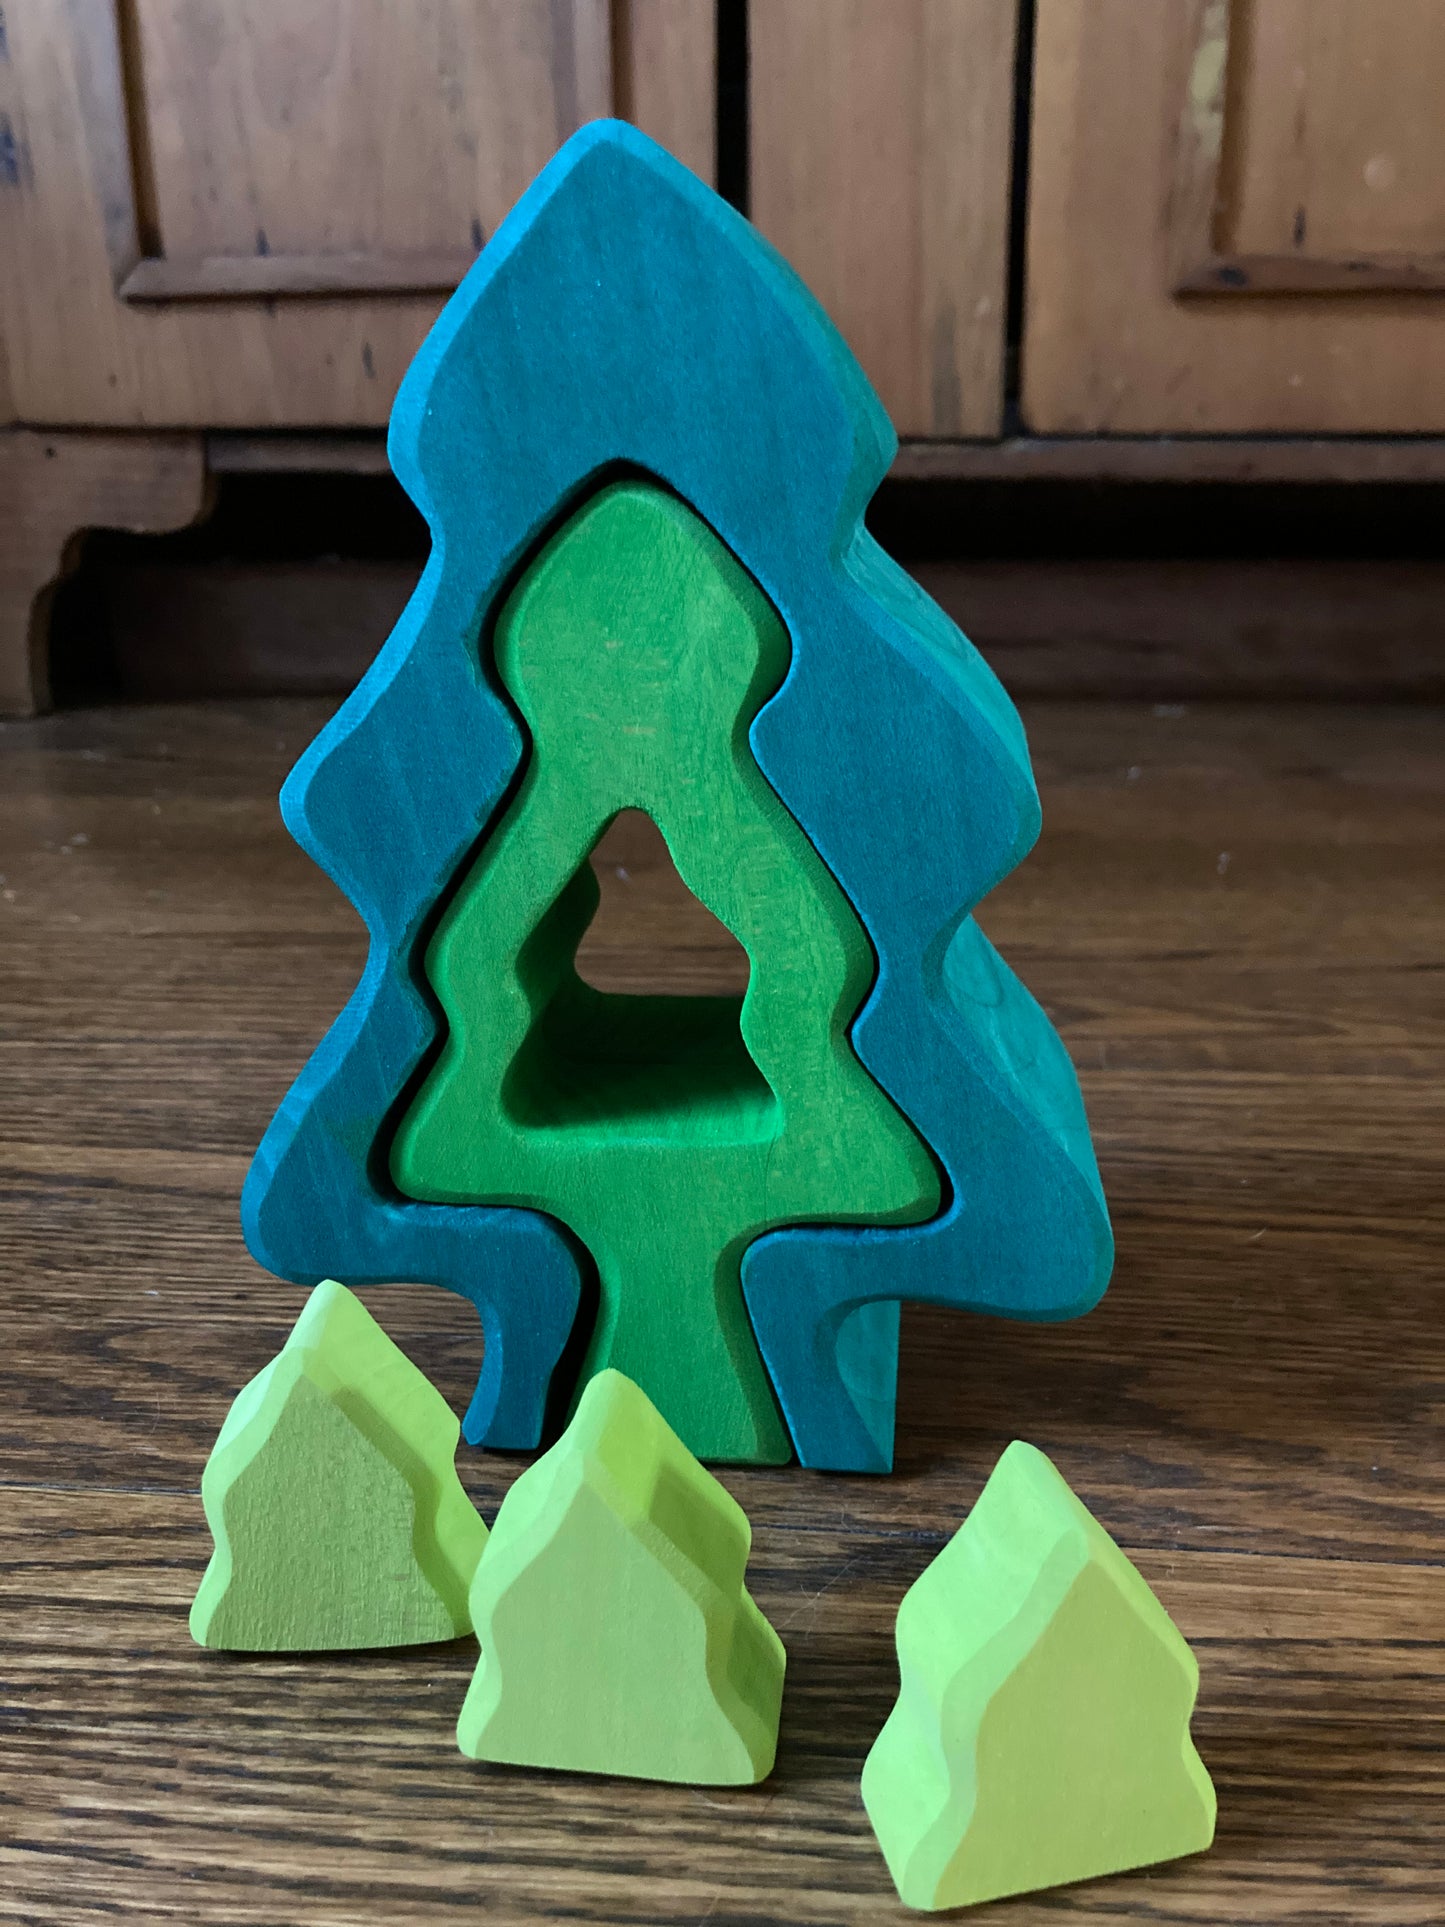 Wooden Dollhouse Play - PINE FIR TREE PUZZLE